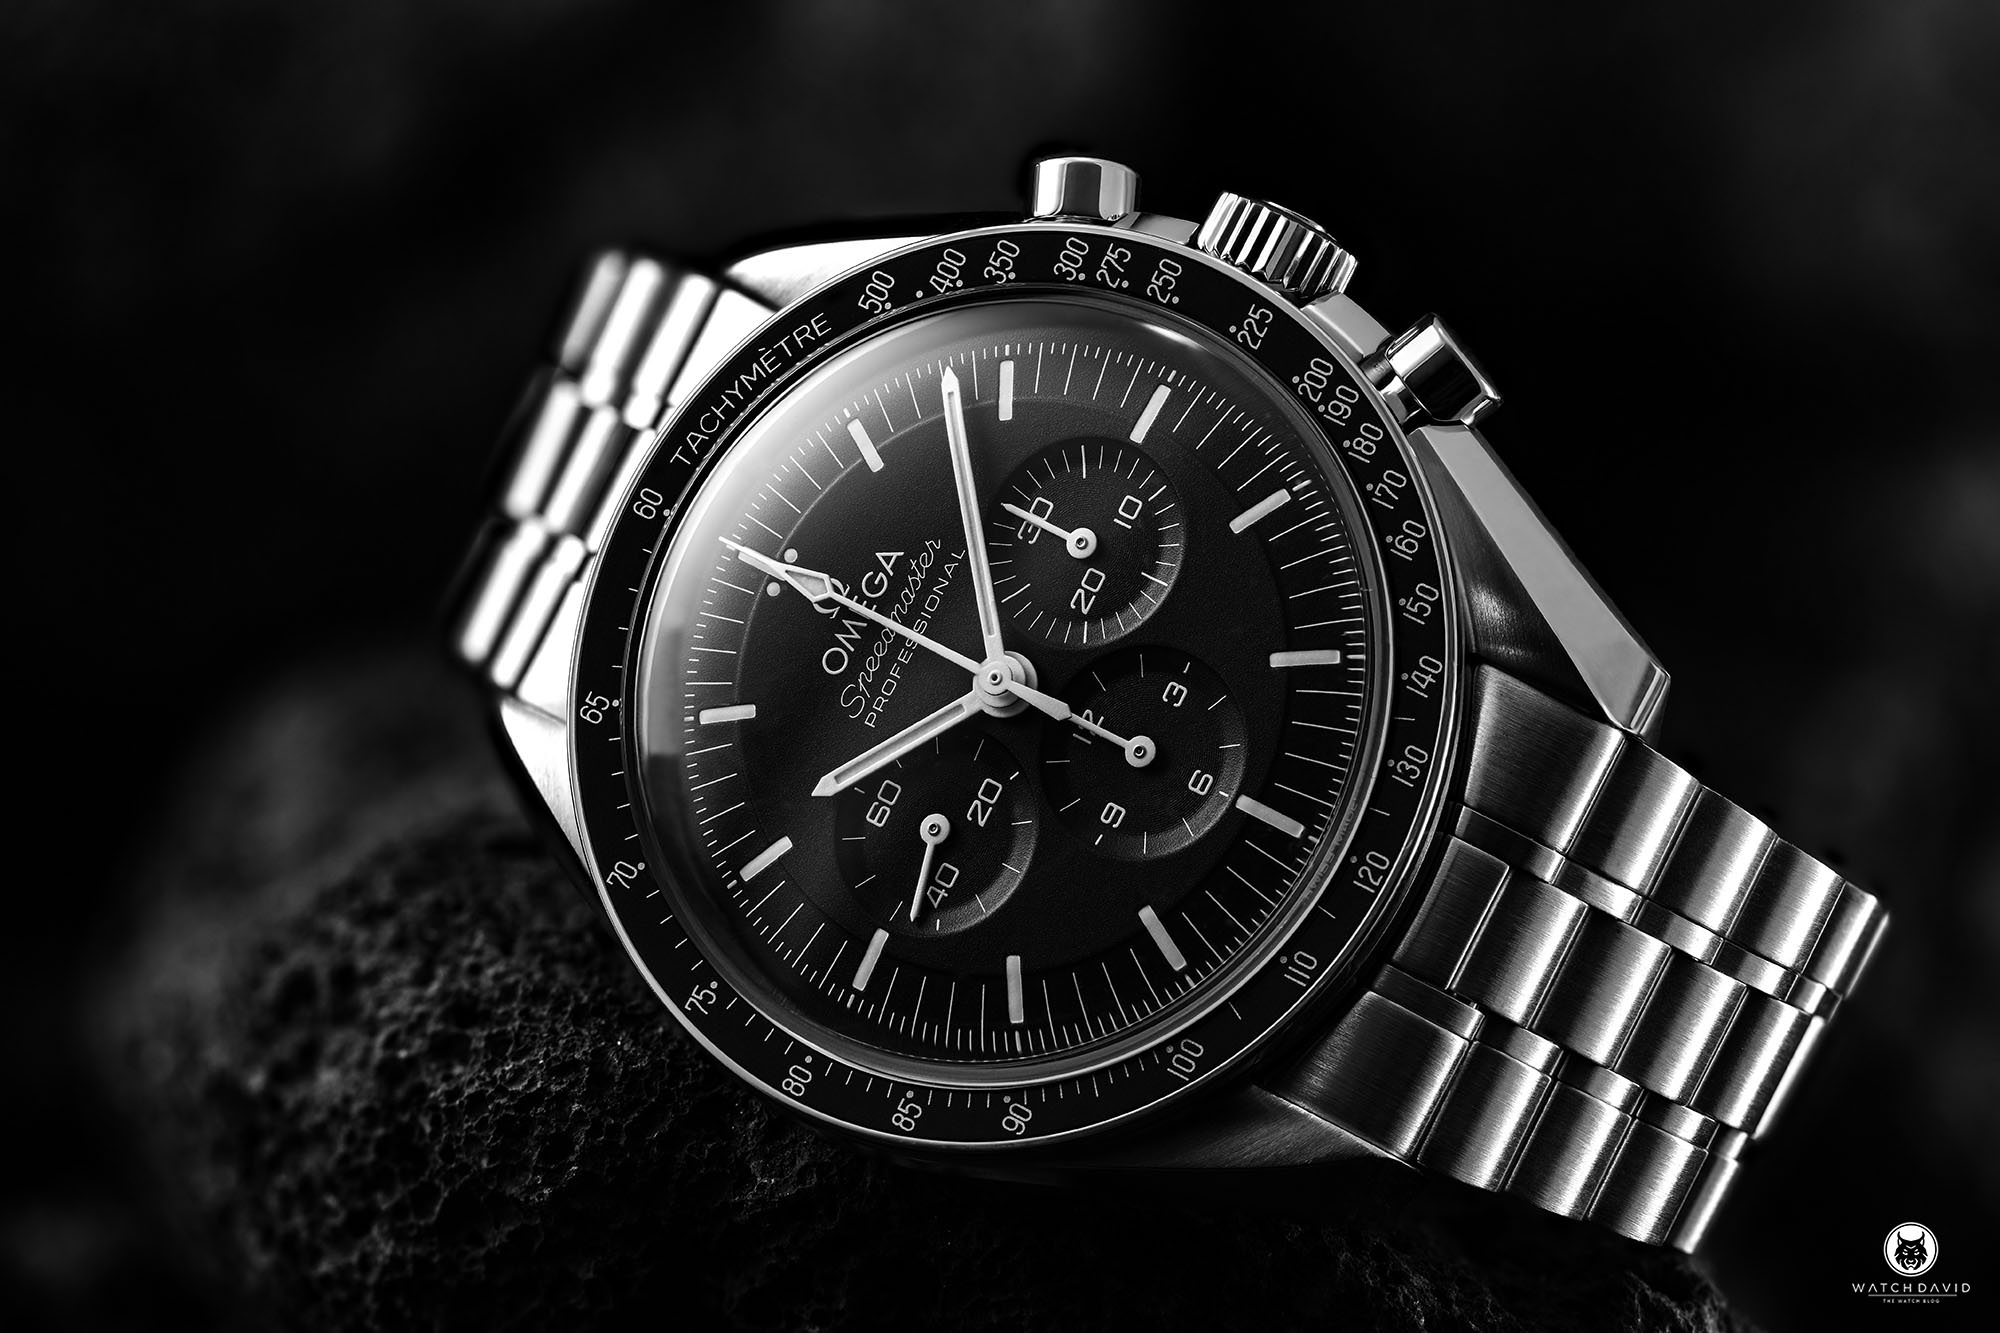 Hands-On With The New Omega Speedmaster Moonwatch Professional - Worn &  Wound